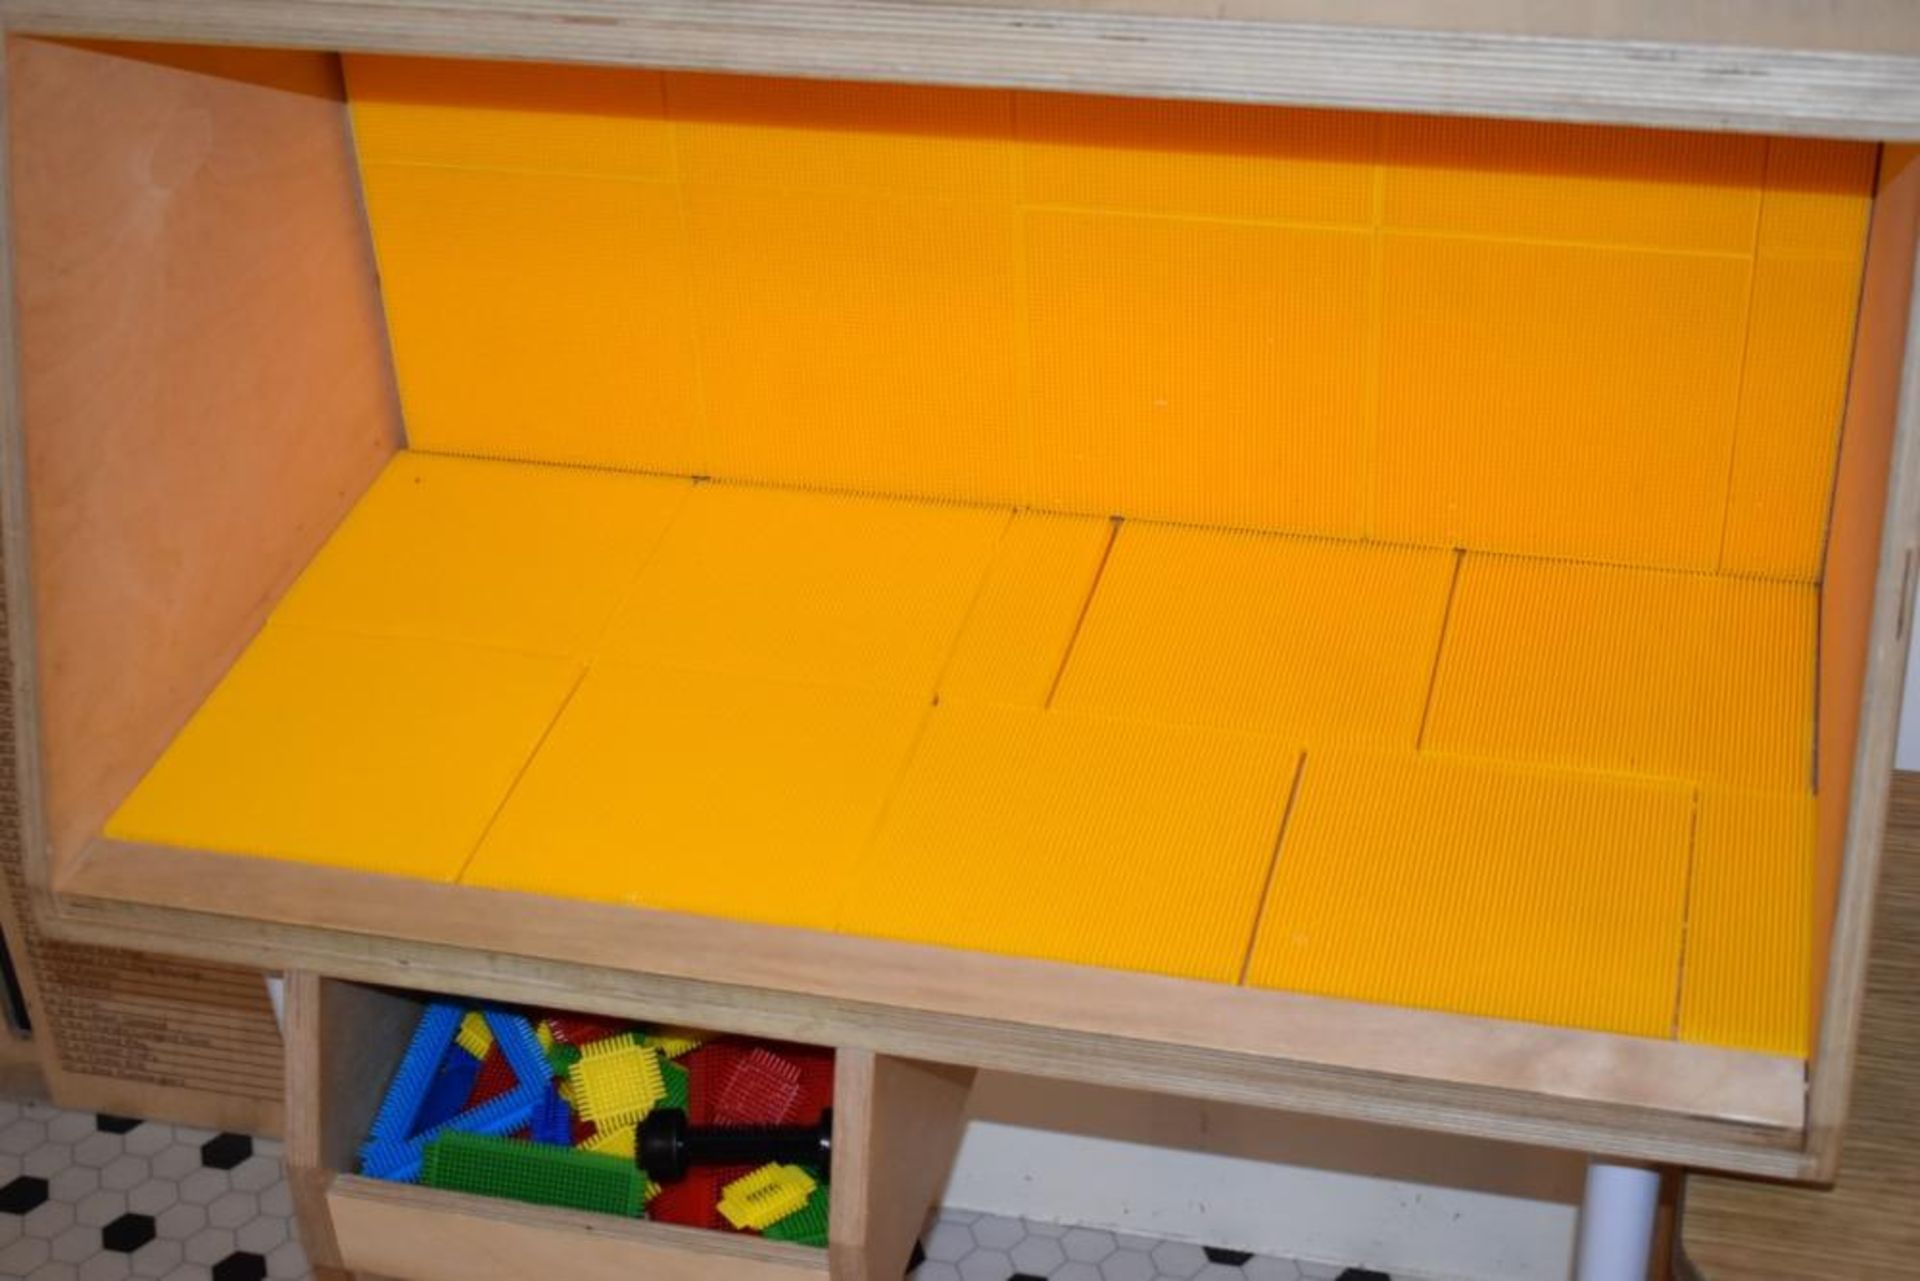 2 x Childrens Building Block Cabinets With Fitted Building Boards - Brillo / Lego - H94 x W79 x - Image 3 of 4